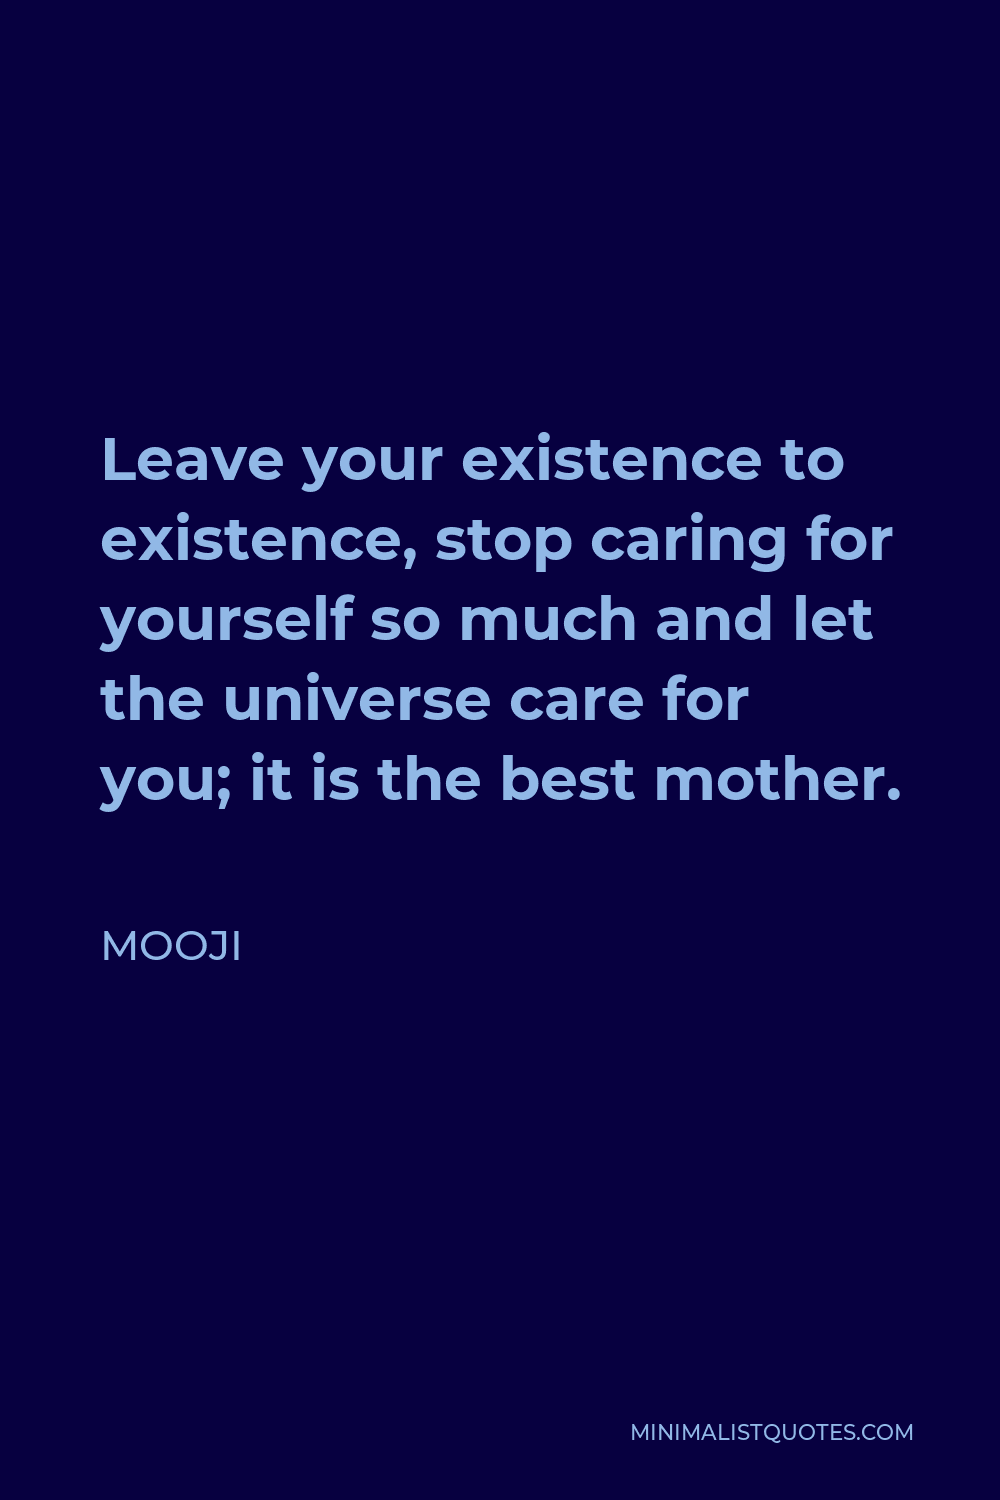 Mooji Quote - Leave your existence to existence, stop caring for yourself so much and let the universe care for you; it is the best mother.